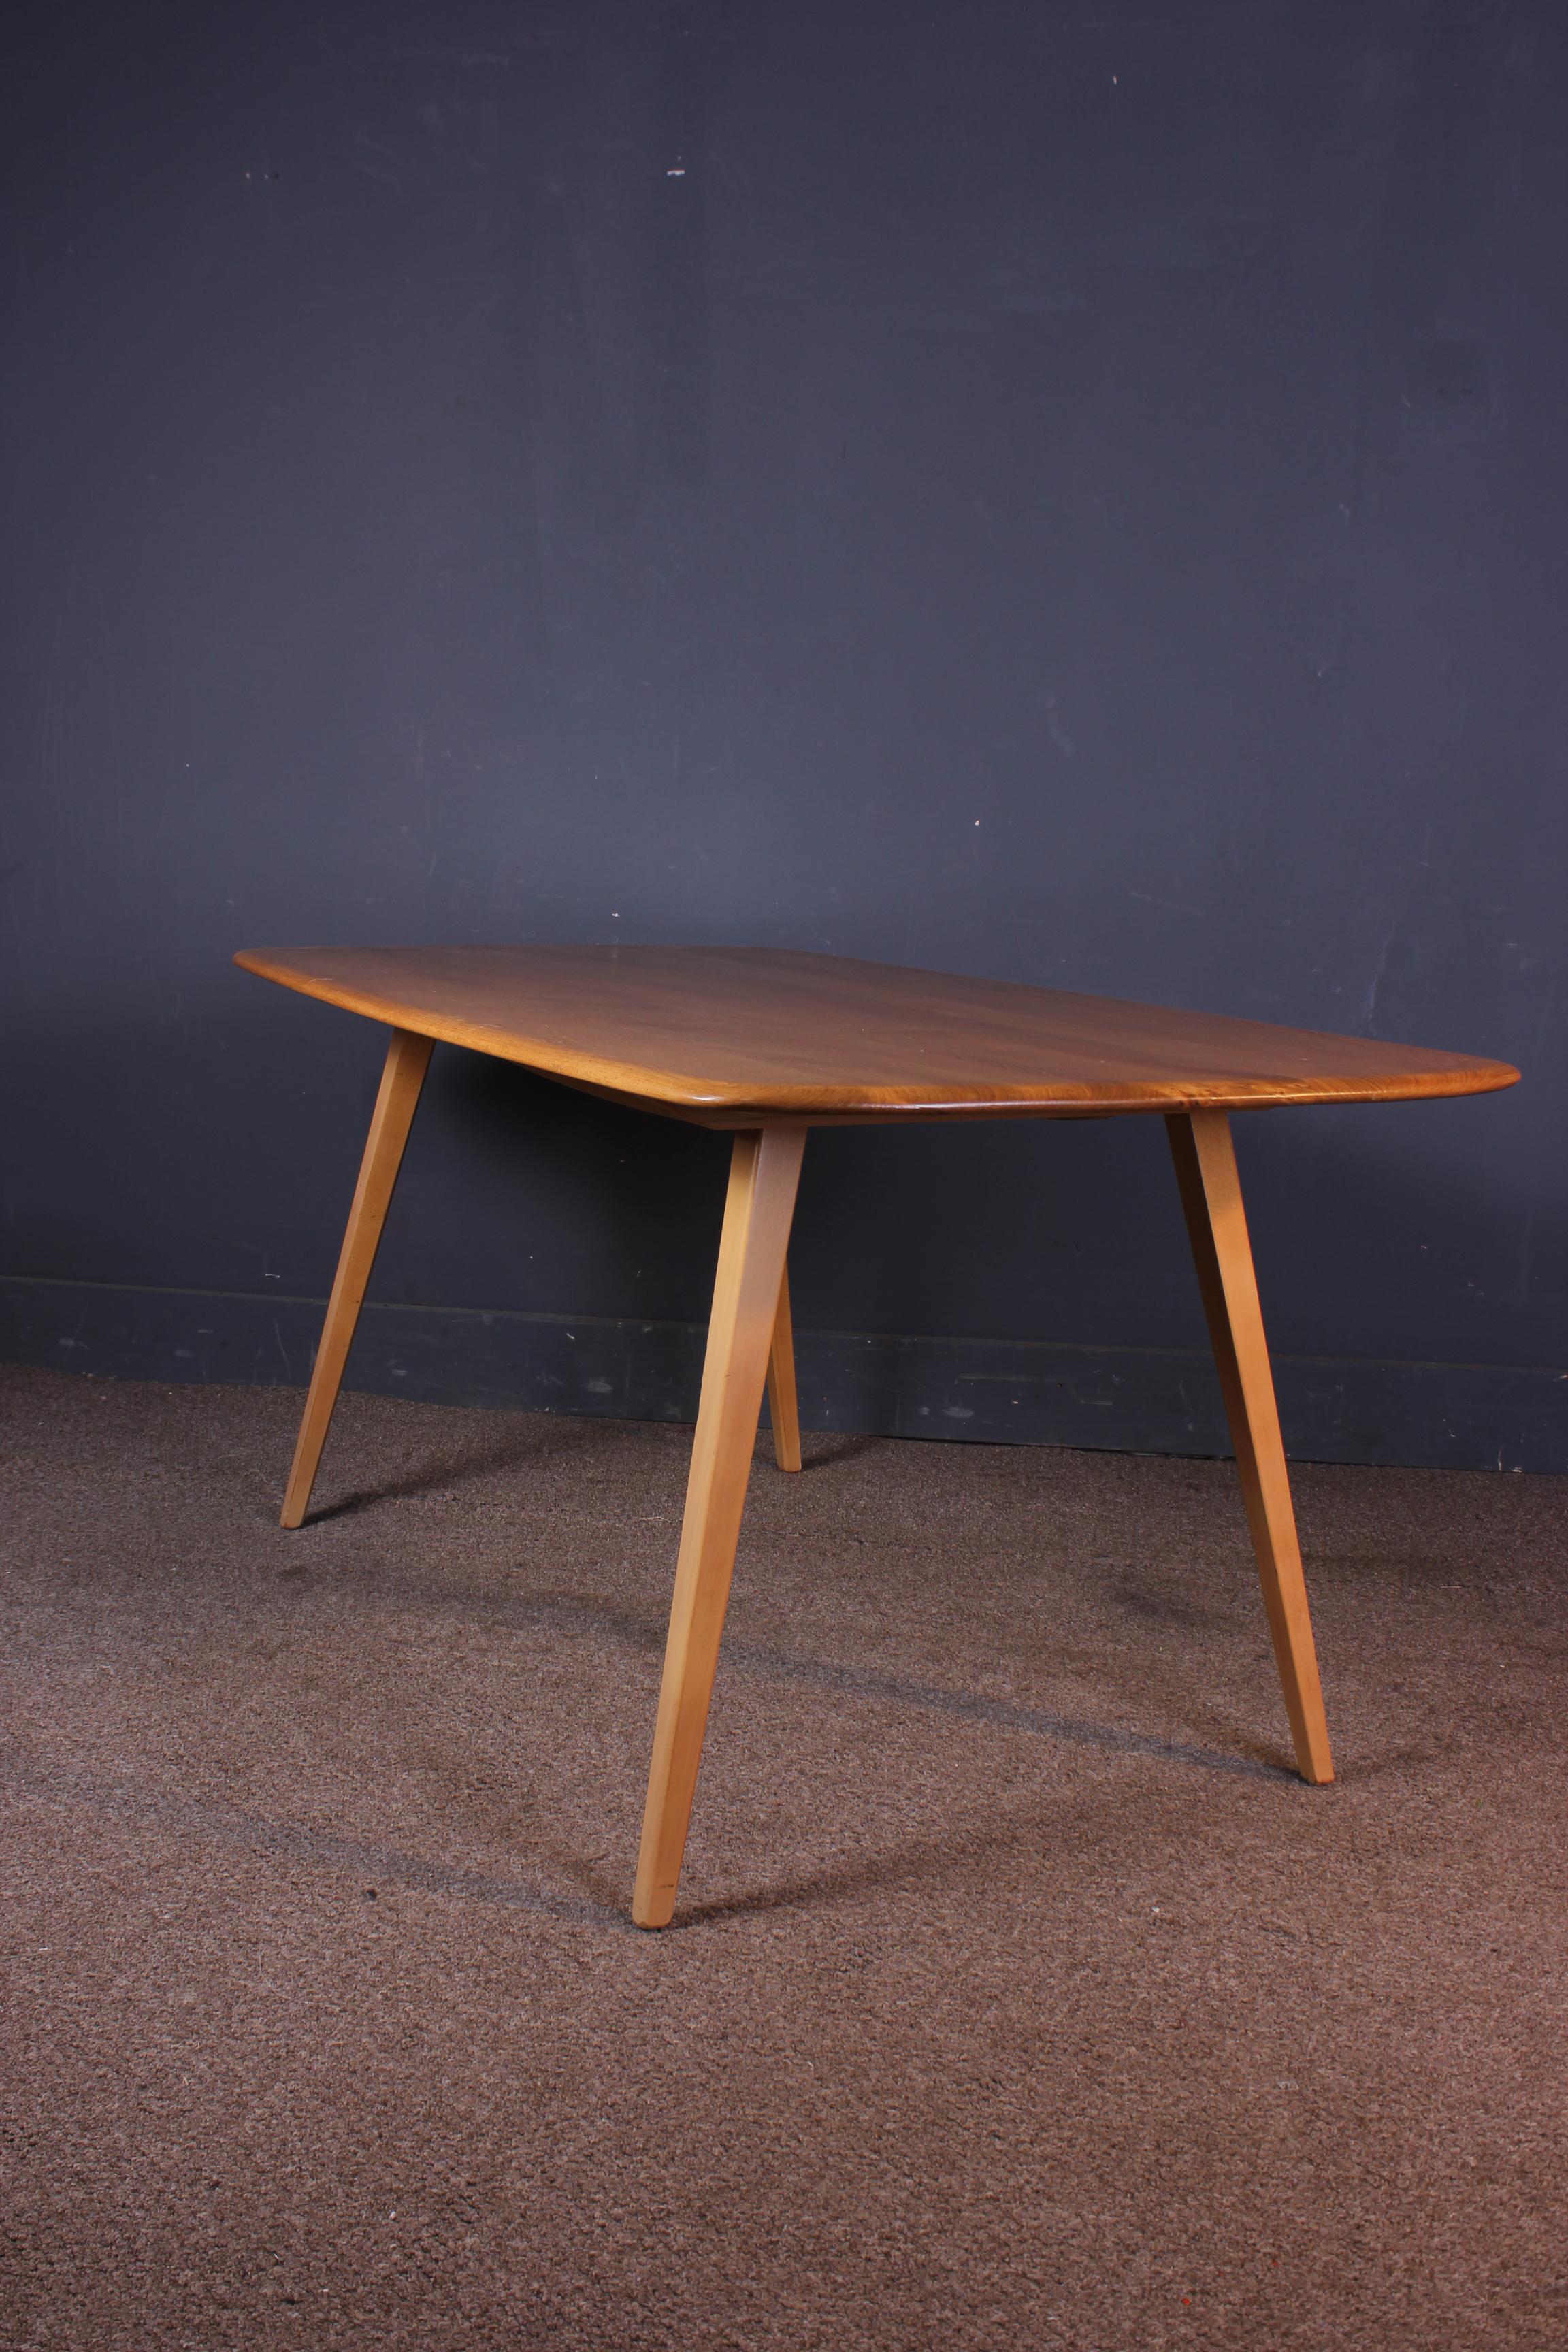 A beautiful vintage/midcentury Ercol blonde plank dining table. It is made from elm and beech and is a very practical size and is designed for six people. It has a smoothly sculptured solid wood top with gracefully shaped beech legs. It is in good